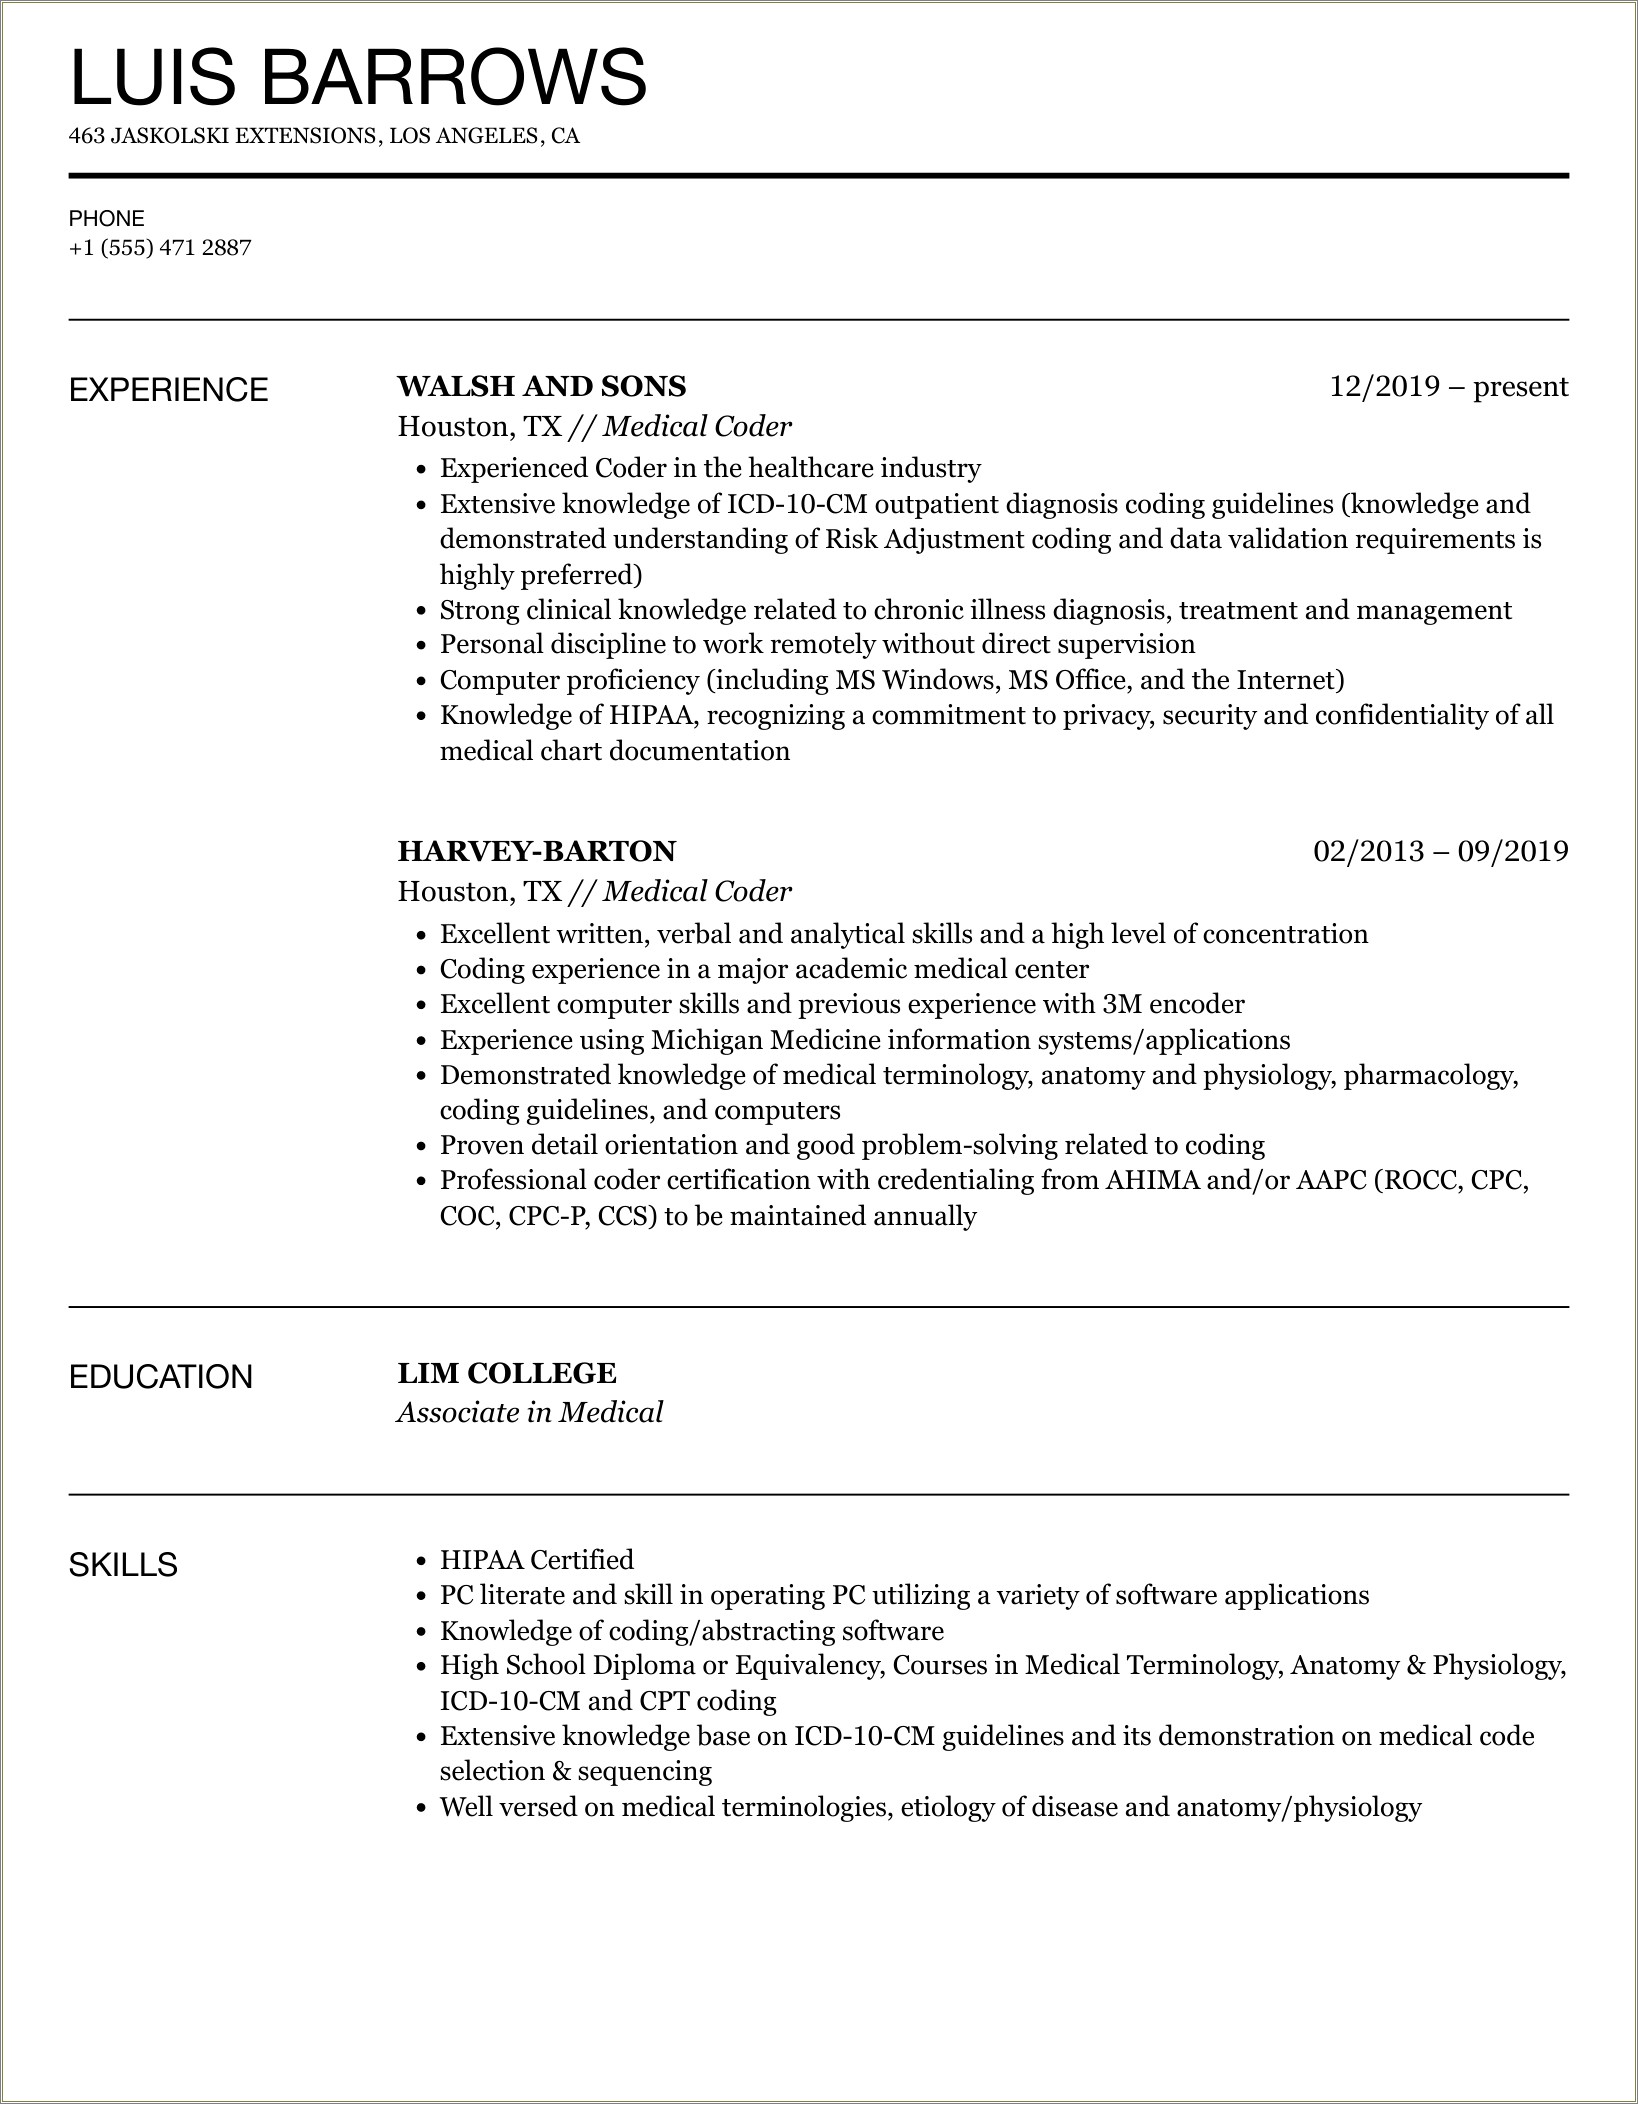 Sample Resume For Medical Coder With Experience